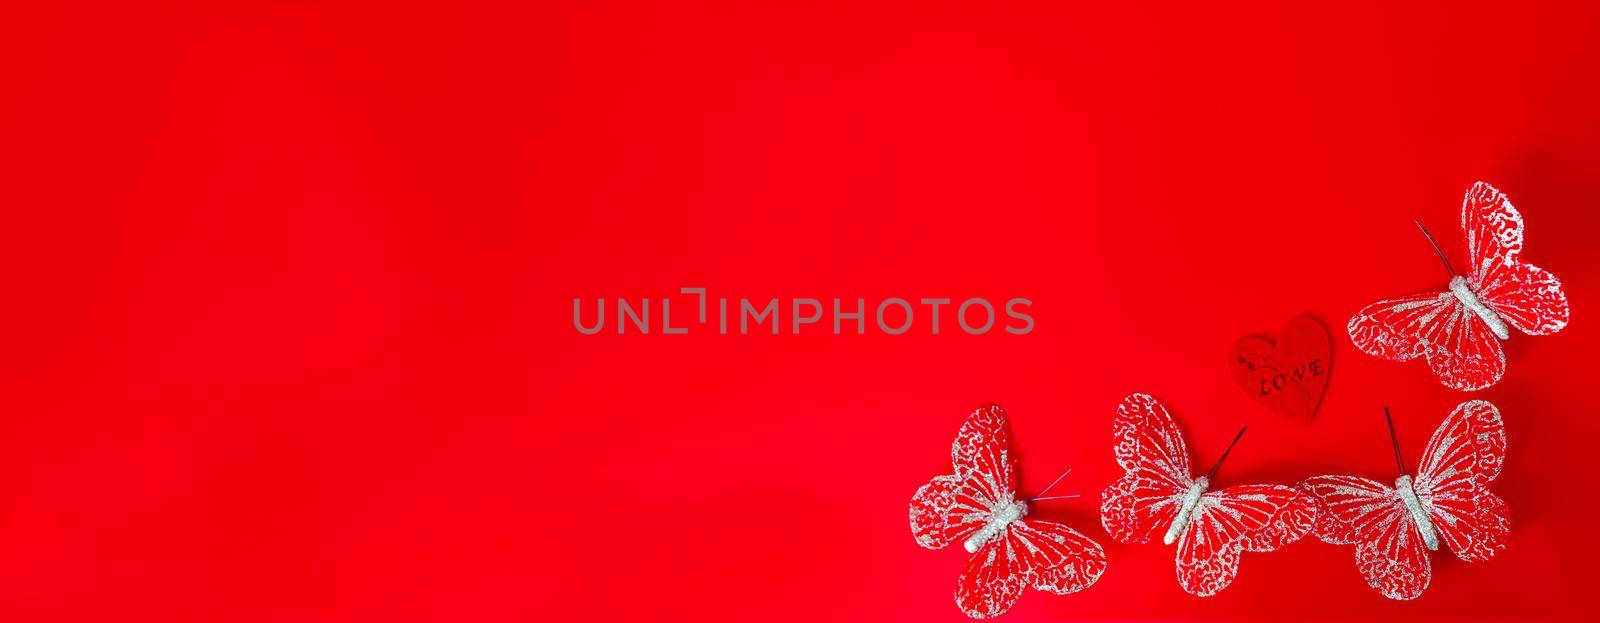 Valentine s day concept, red butterflies on red background. Greeting Cards. copy space. by lifesummerlin